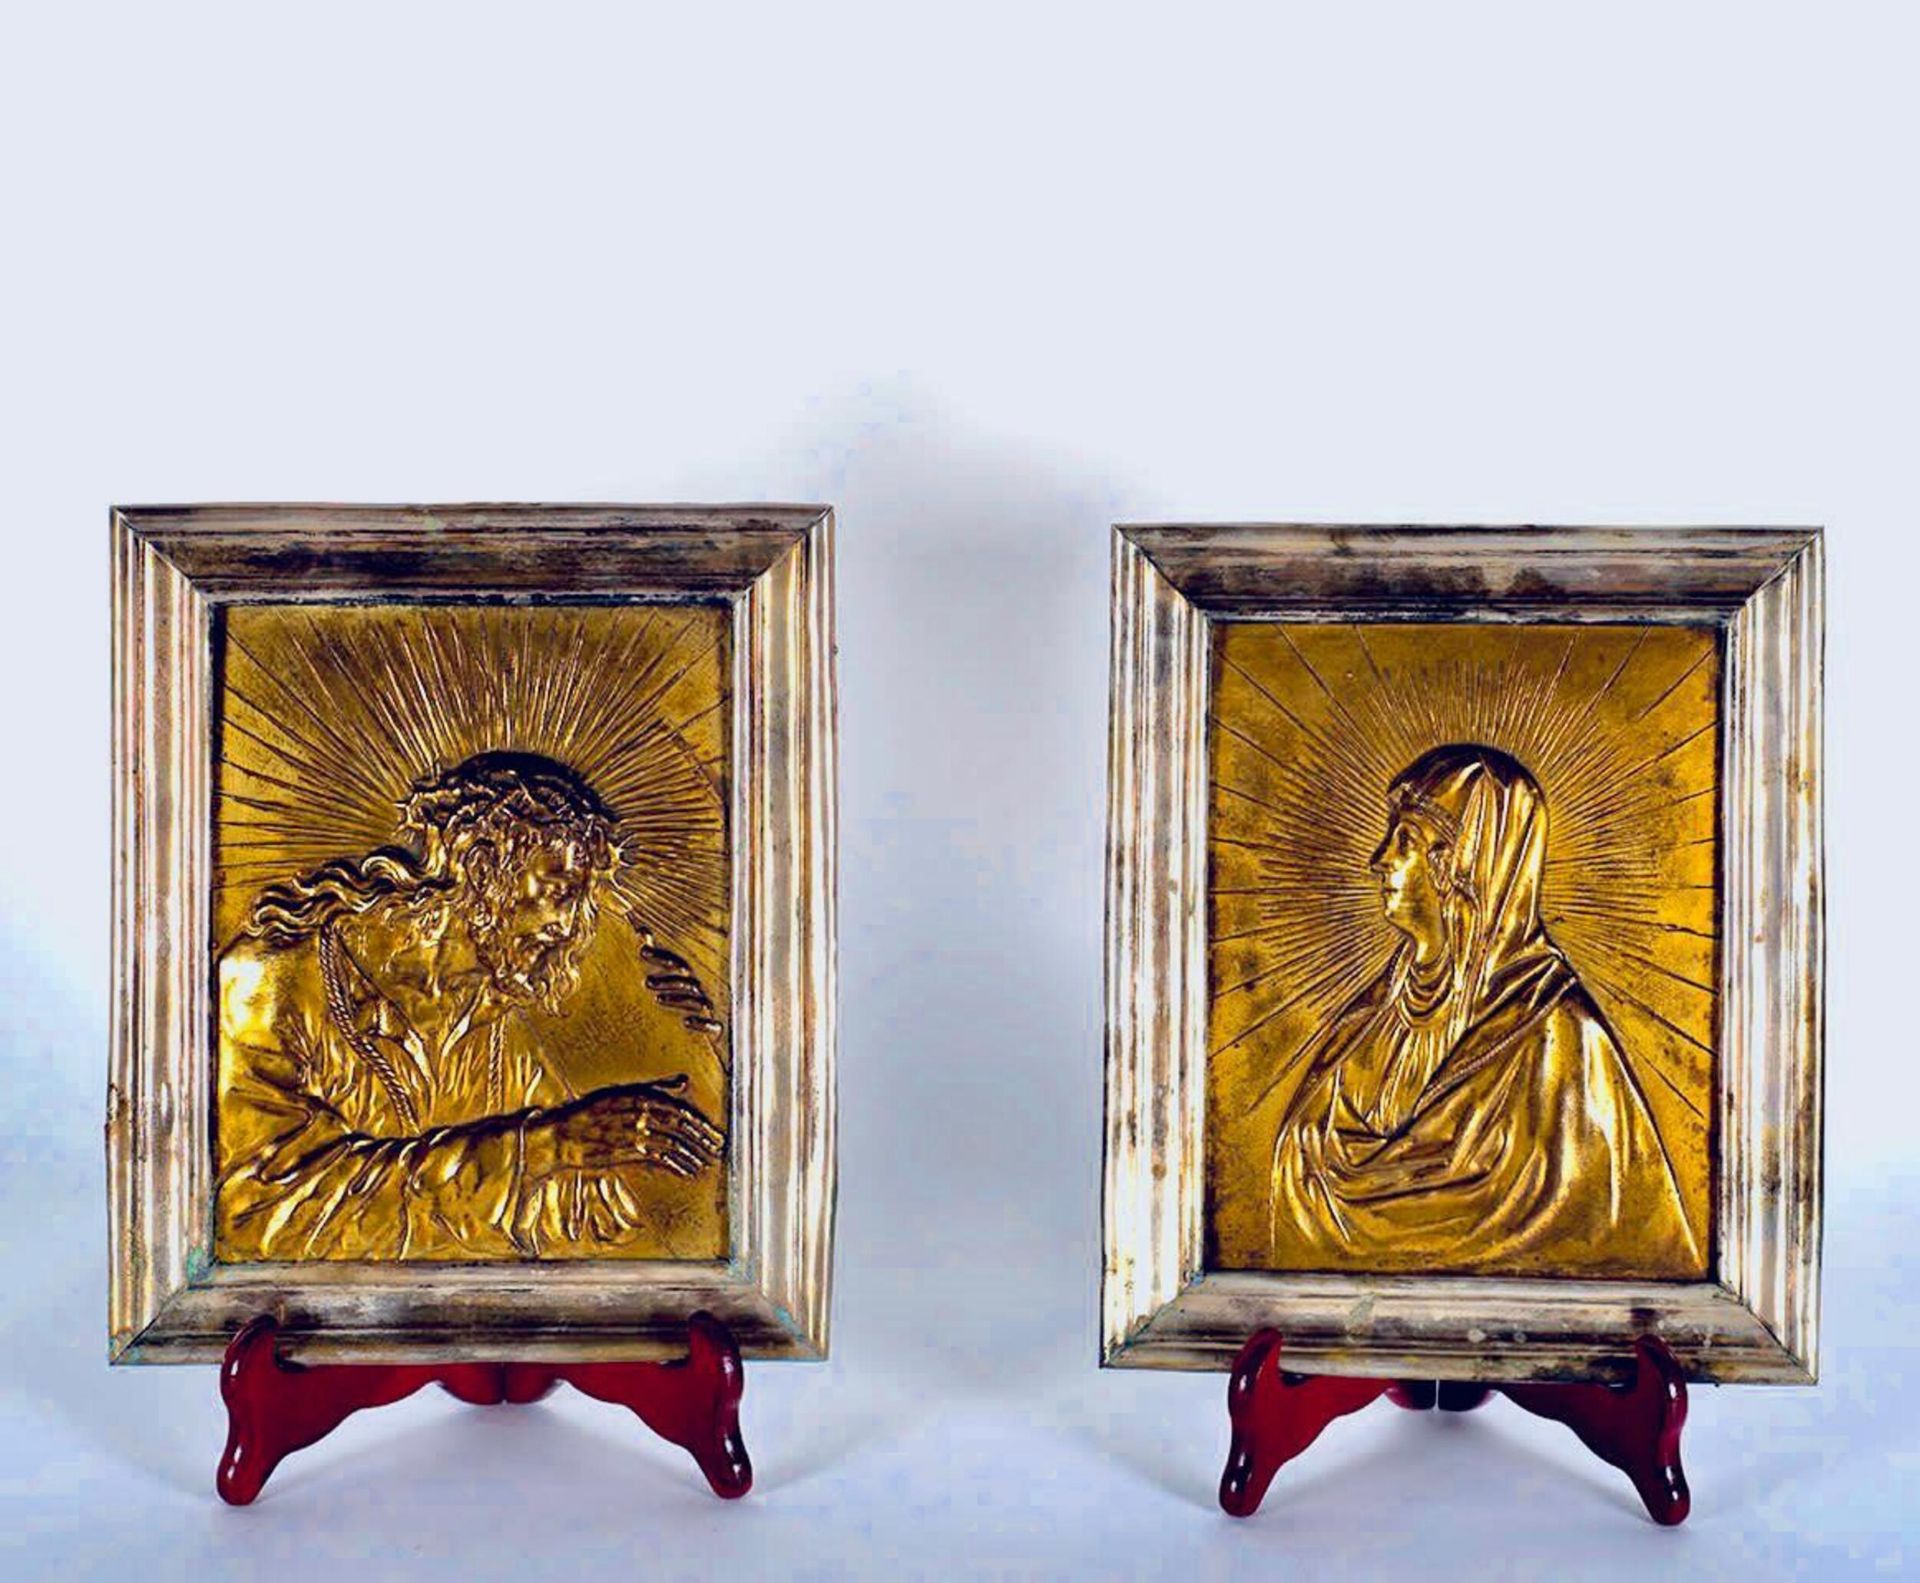 "Ecce Homo and Dolorosa" an important pair of Italian or Flemish Bronzes from the late 16th century